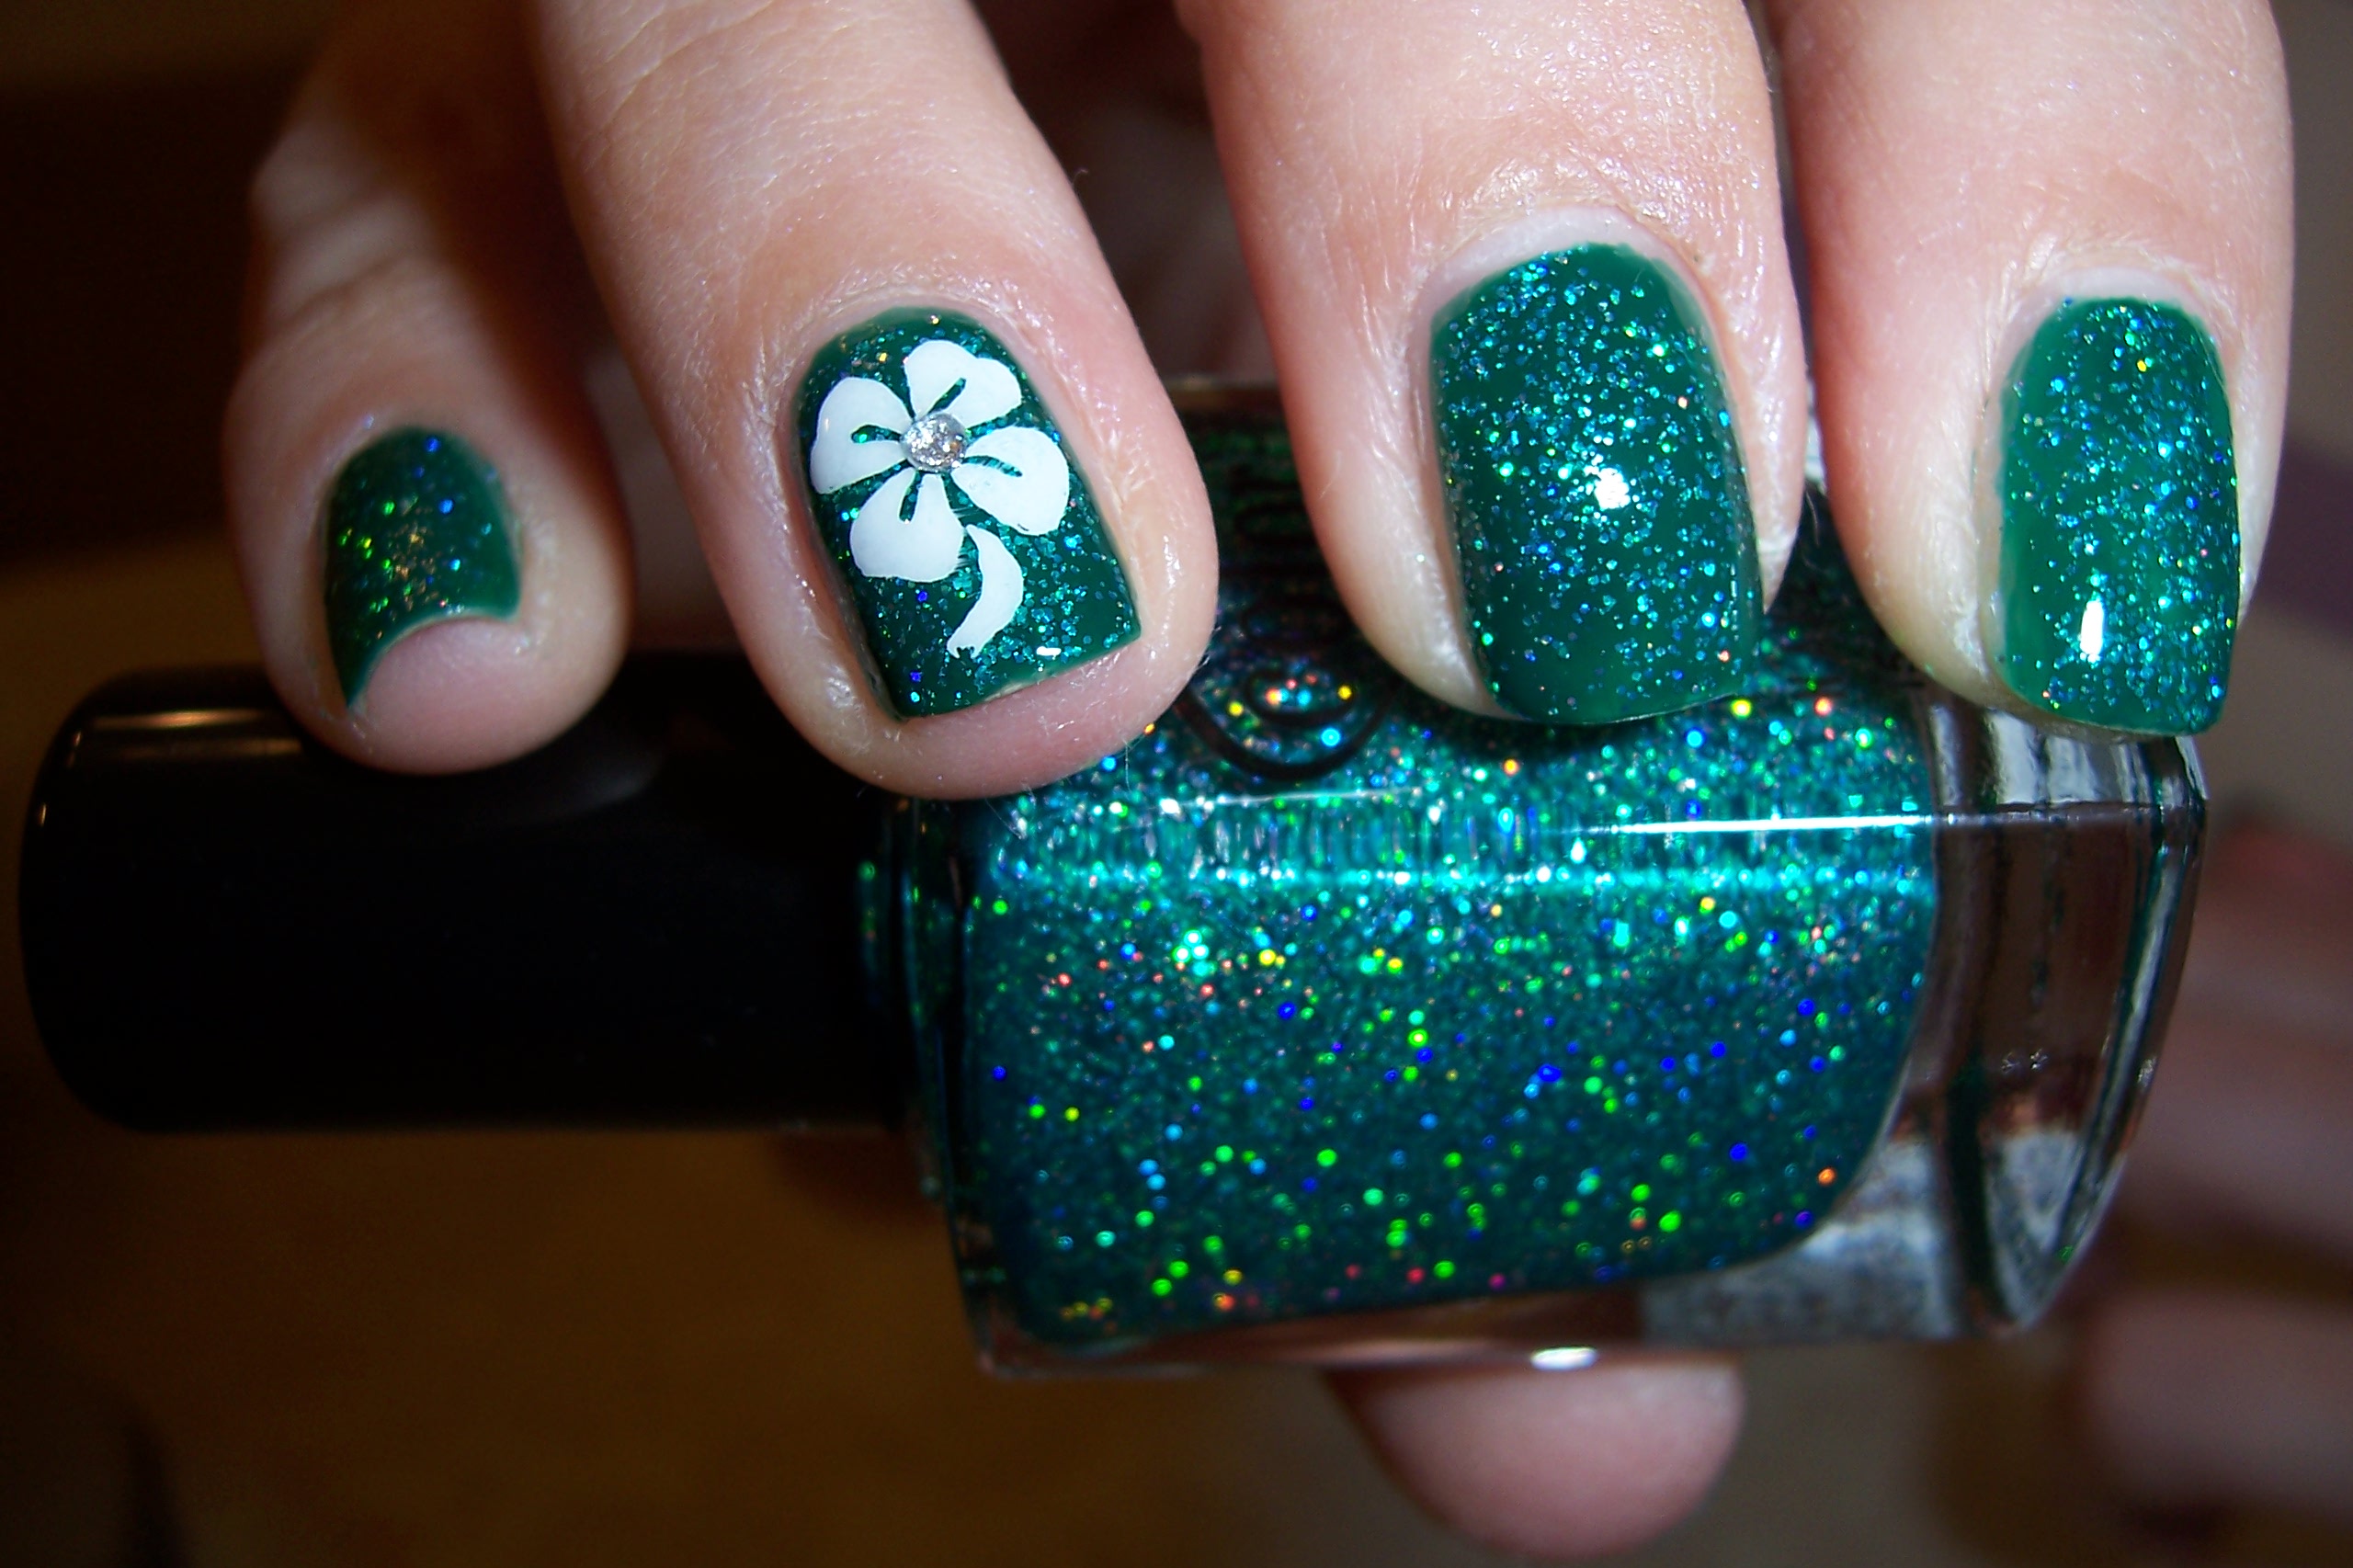 2. Green and Gold Nail Design - wide 3